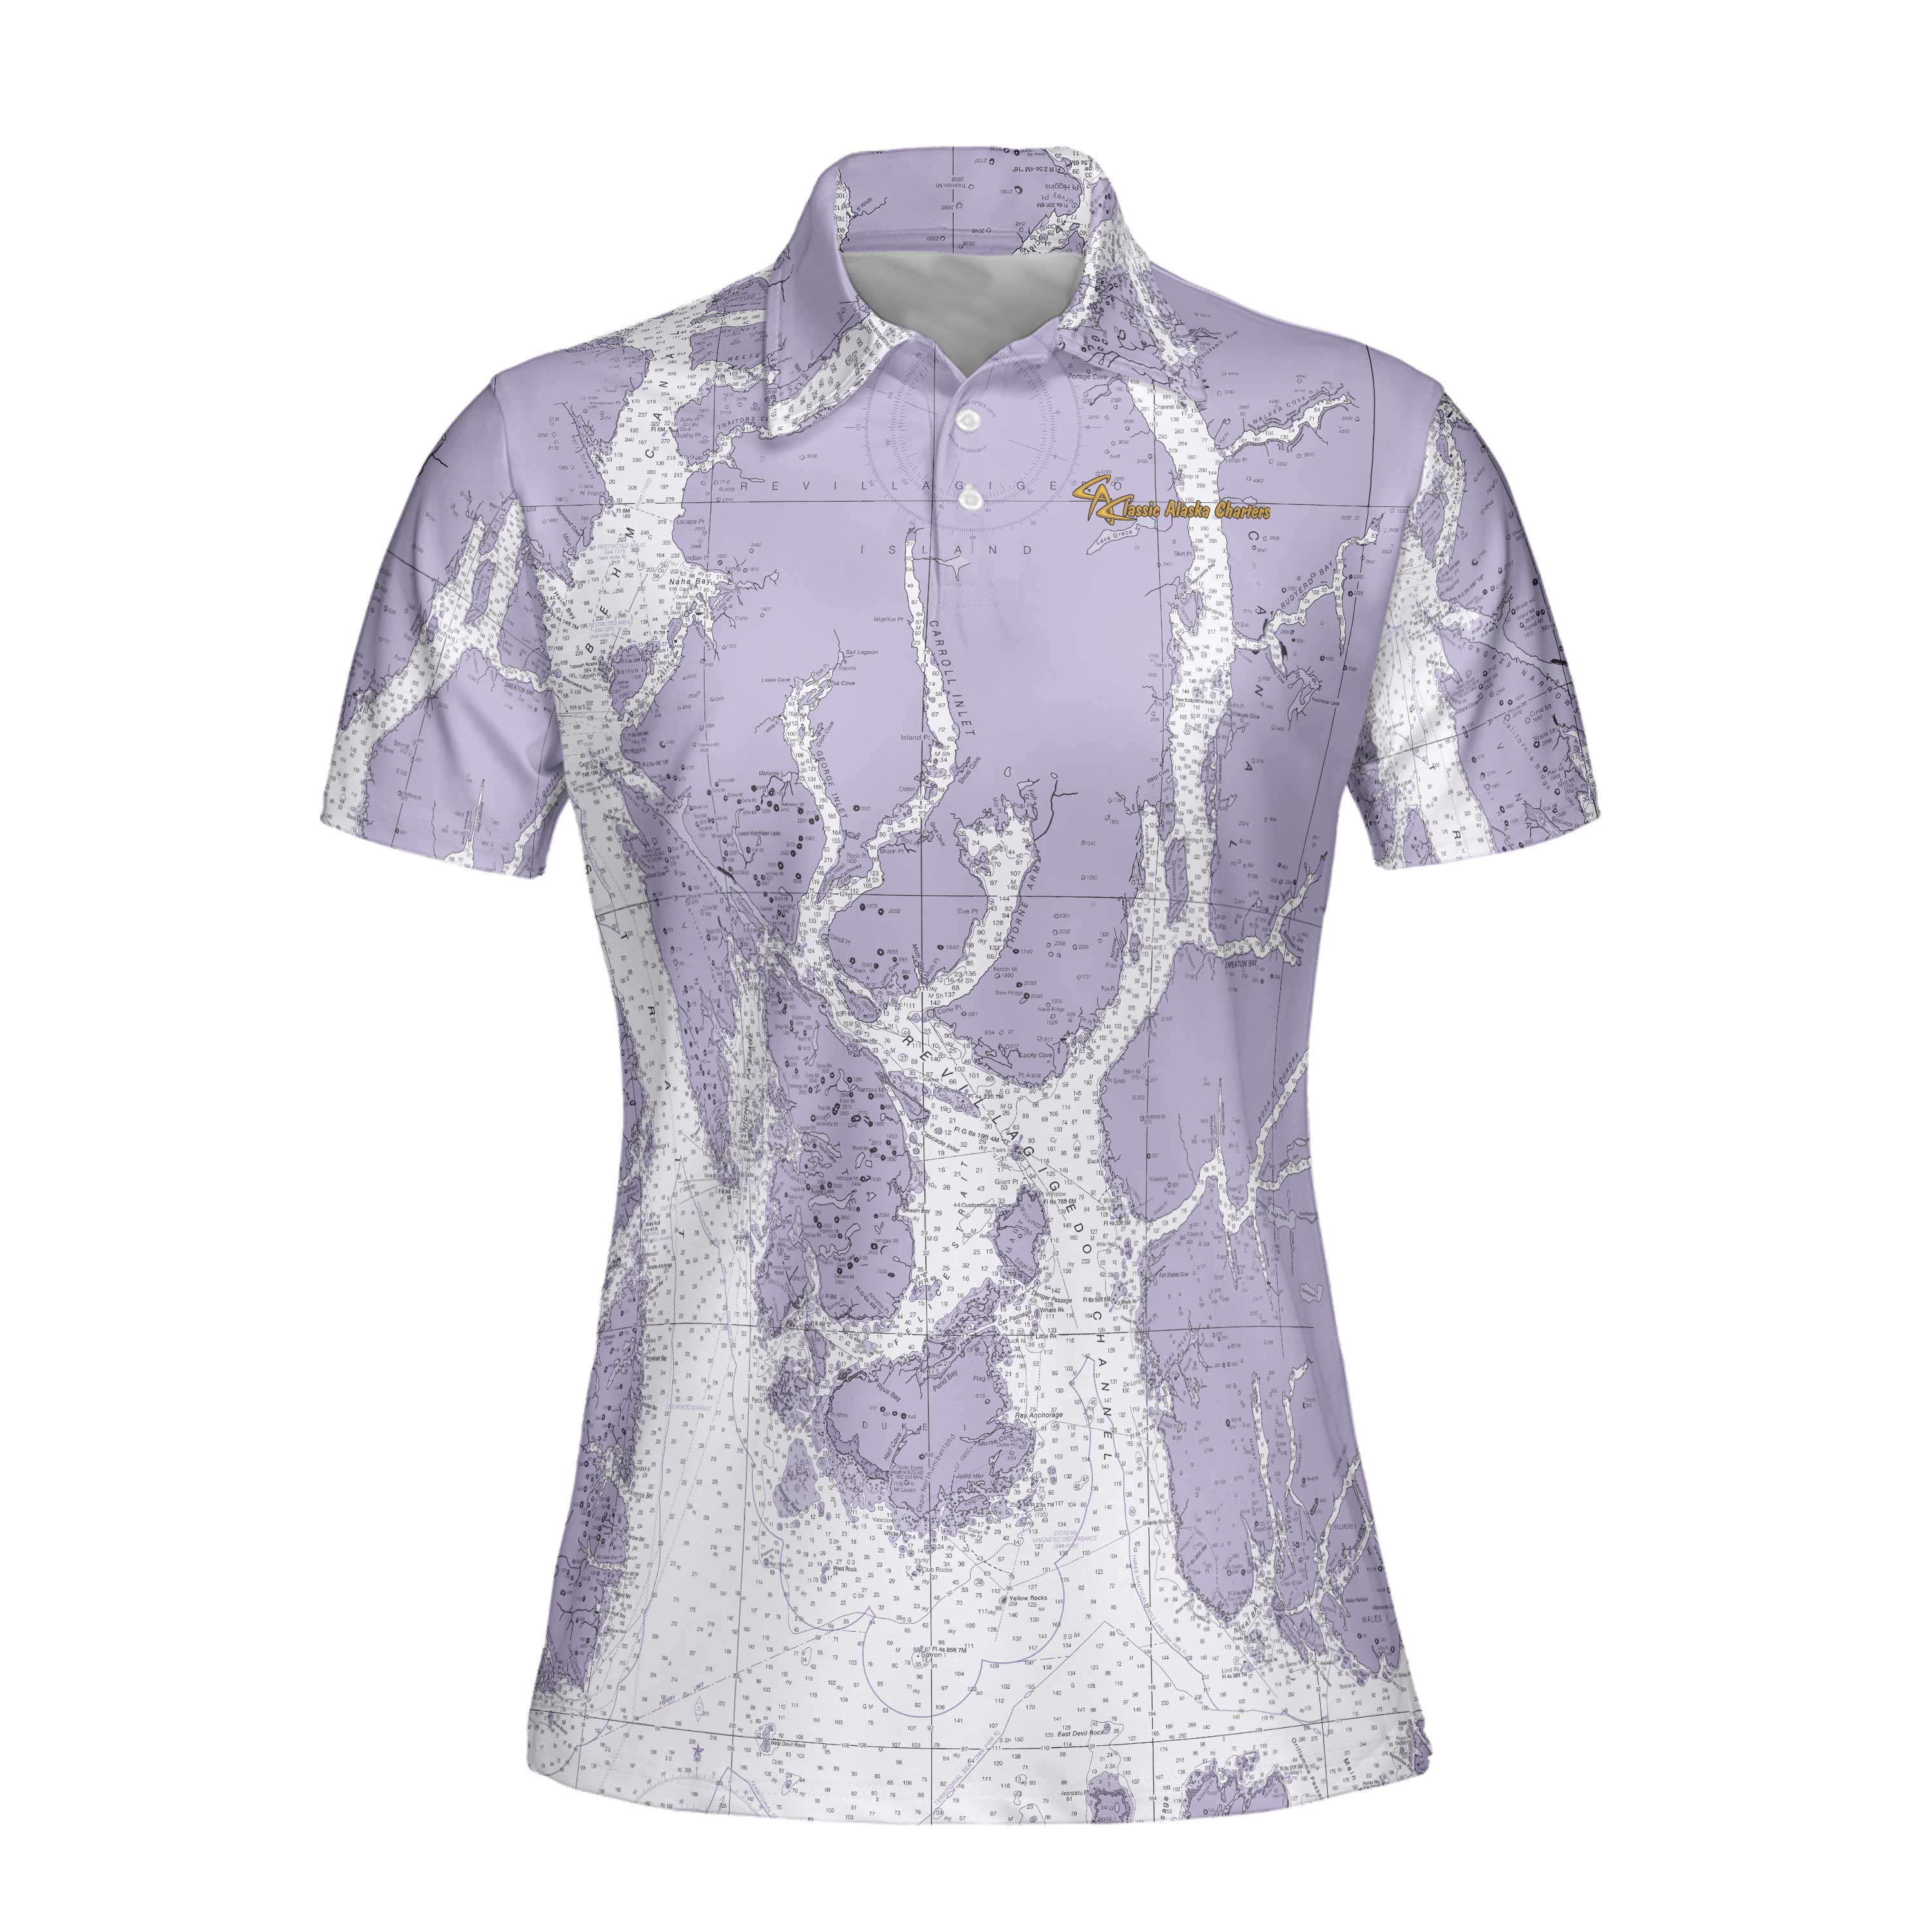 The CAC Violet Ketchikan Women's Polo